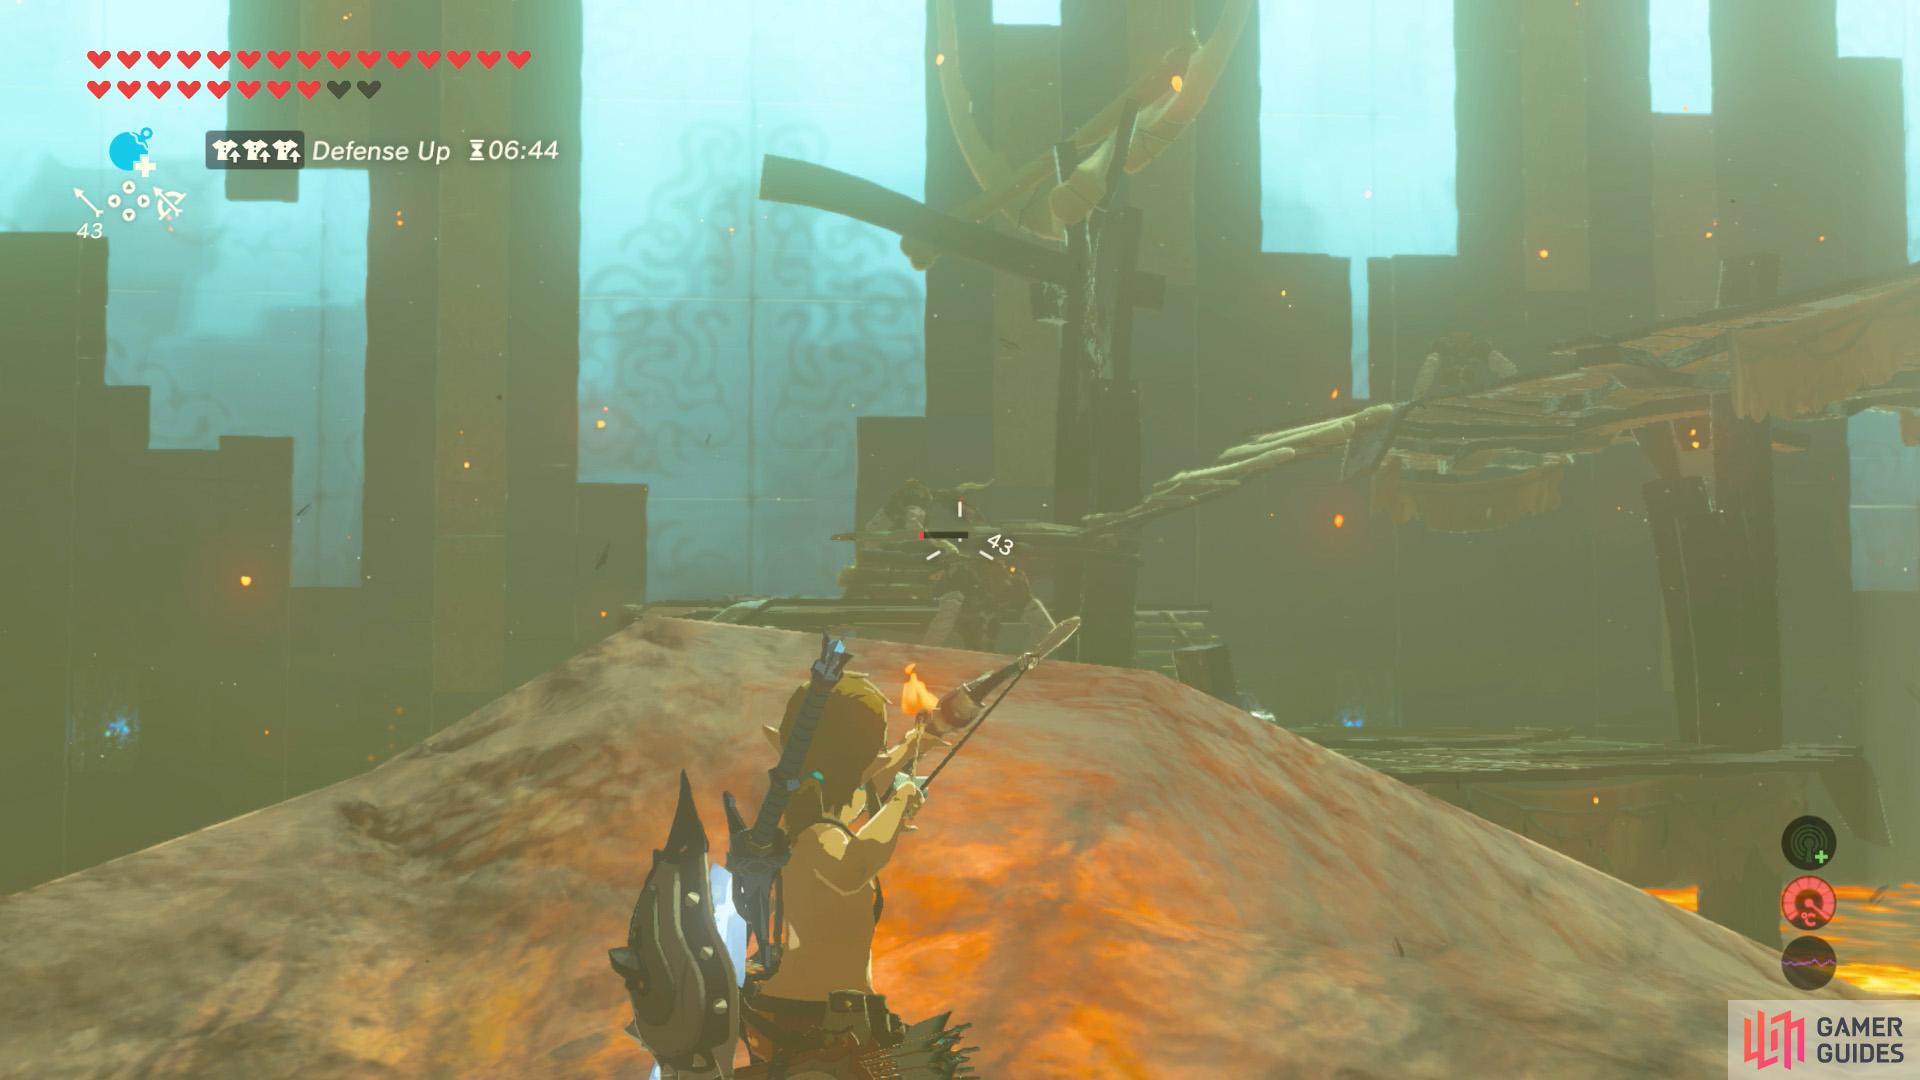 If you have plenty of arrows, snipe the first Moblin to clear some space.